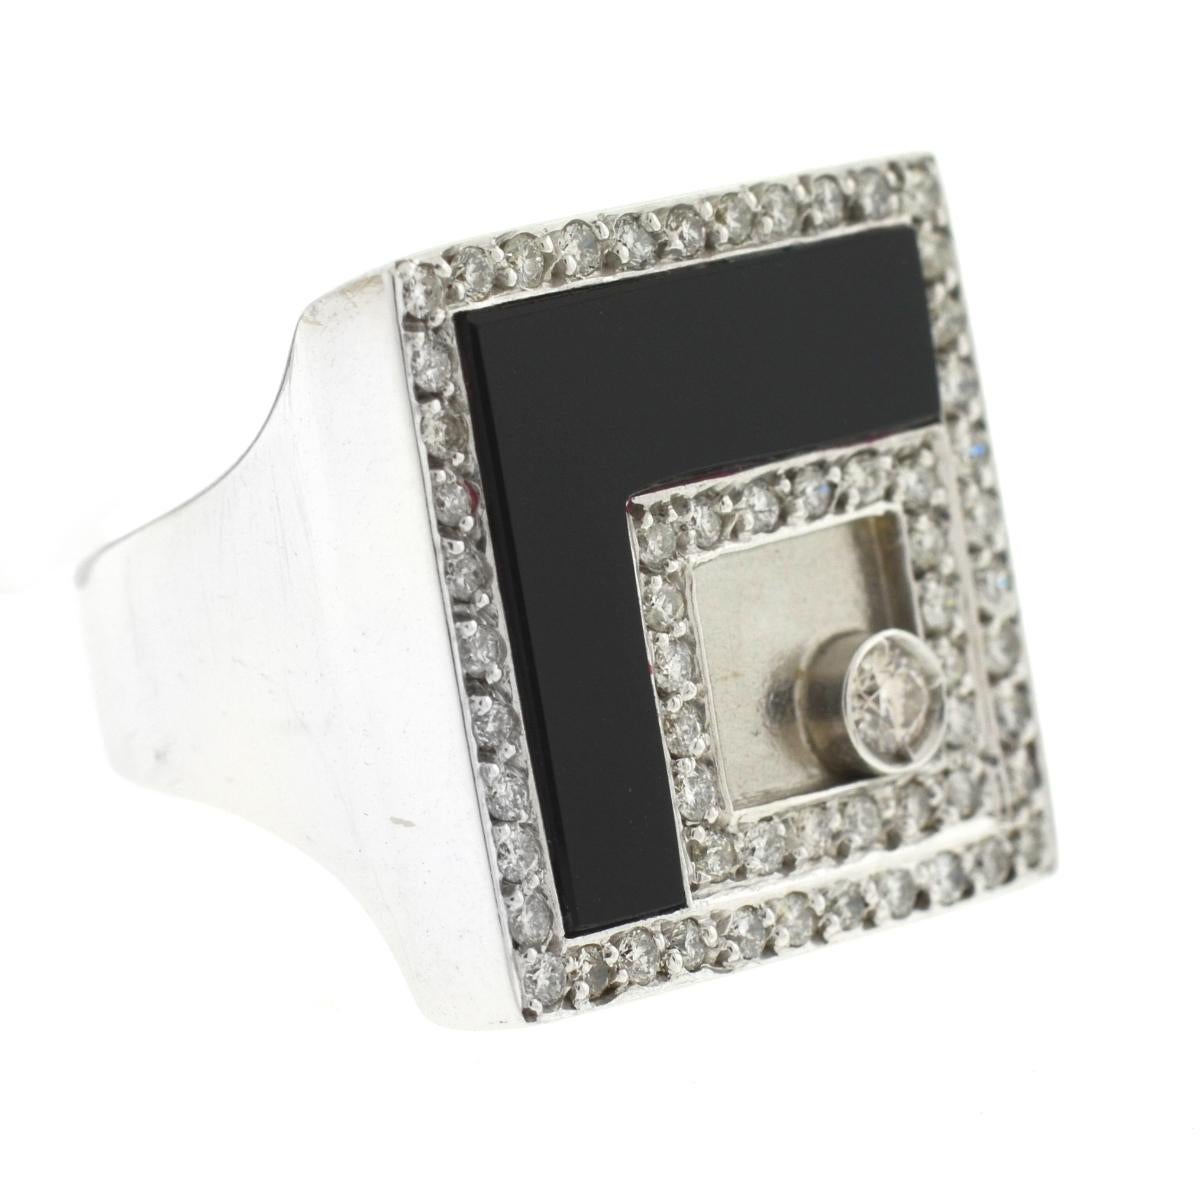 Style - Square Diamond & Onyx Ring
Size - 7
Metal - 18k White Gold
Weight - 11.4 Grams
Stones - Onyx and Diamonds (approx. .80cts)
10316-3mee